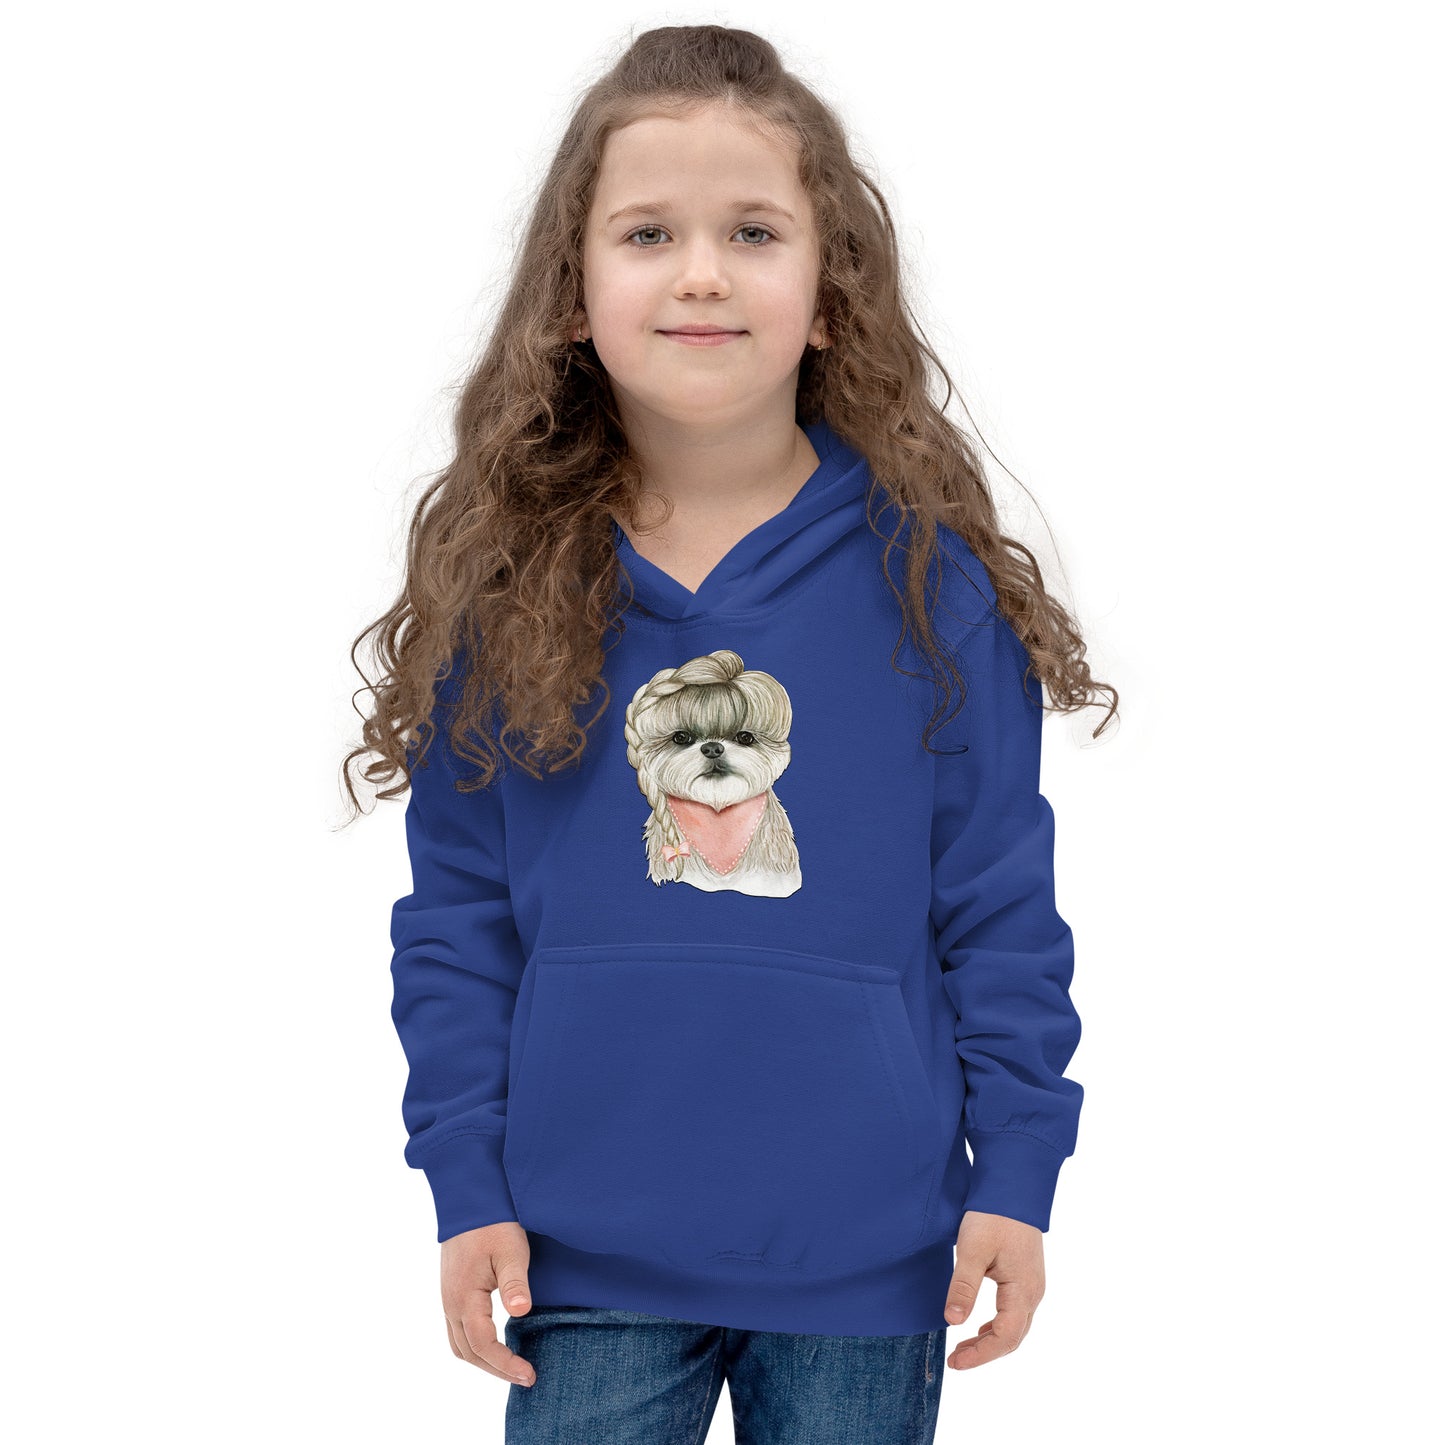 Adorable Dog with Hair Braids Ribbon Hoodie, No. 0564